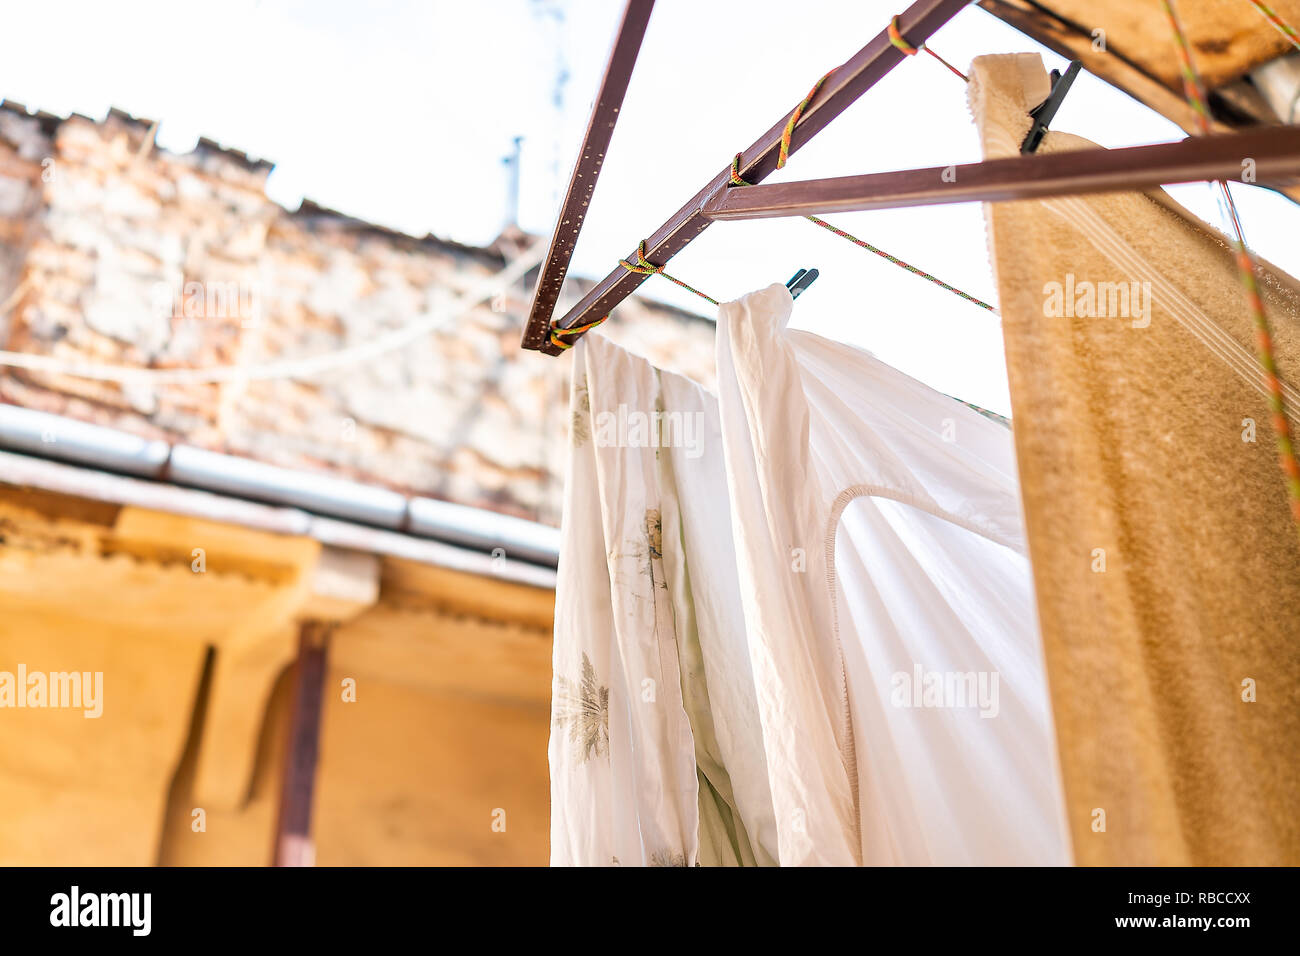 Closeup of yellow hanging clothes in summer with bedding linen and towels drying on rack clothesline line in Ukraine by old vintage Lviv Ukrainian apa Stock Photo